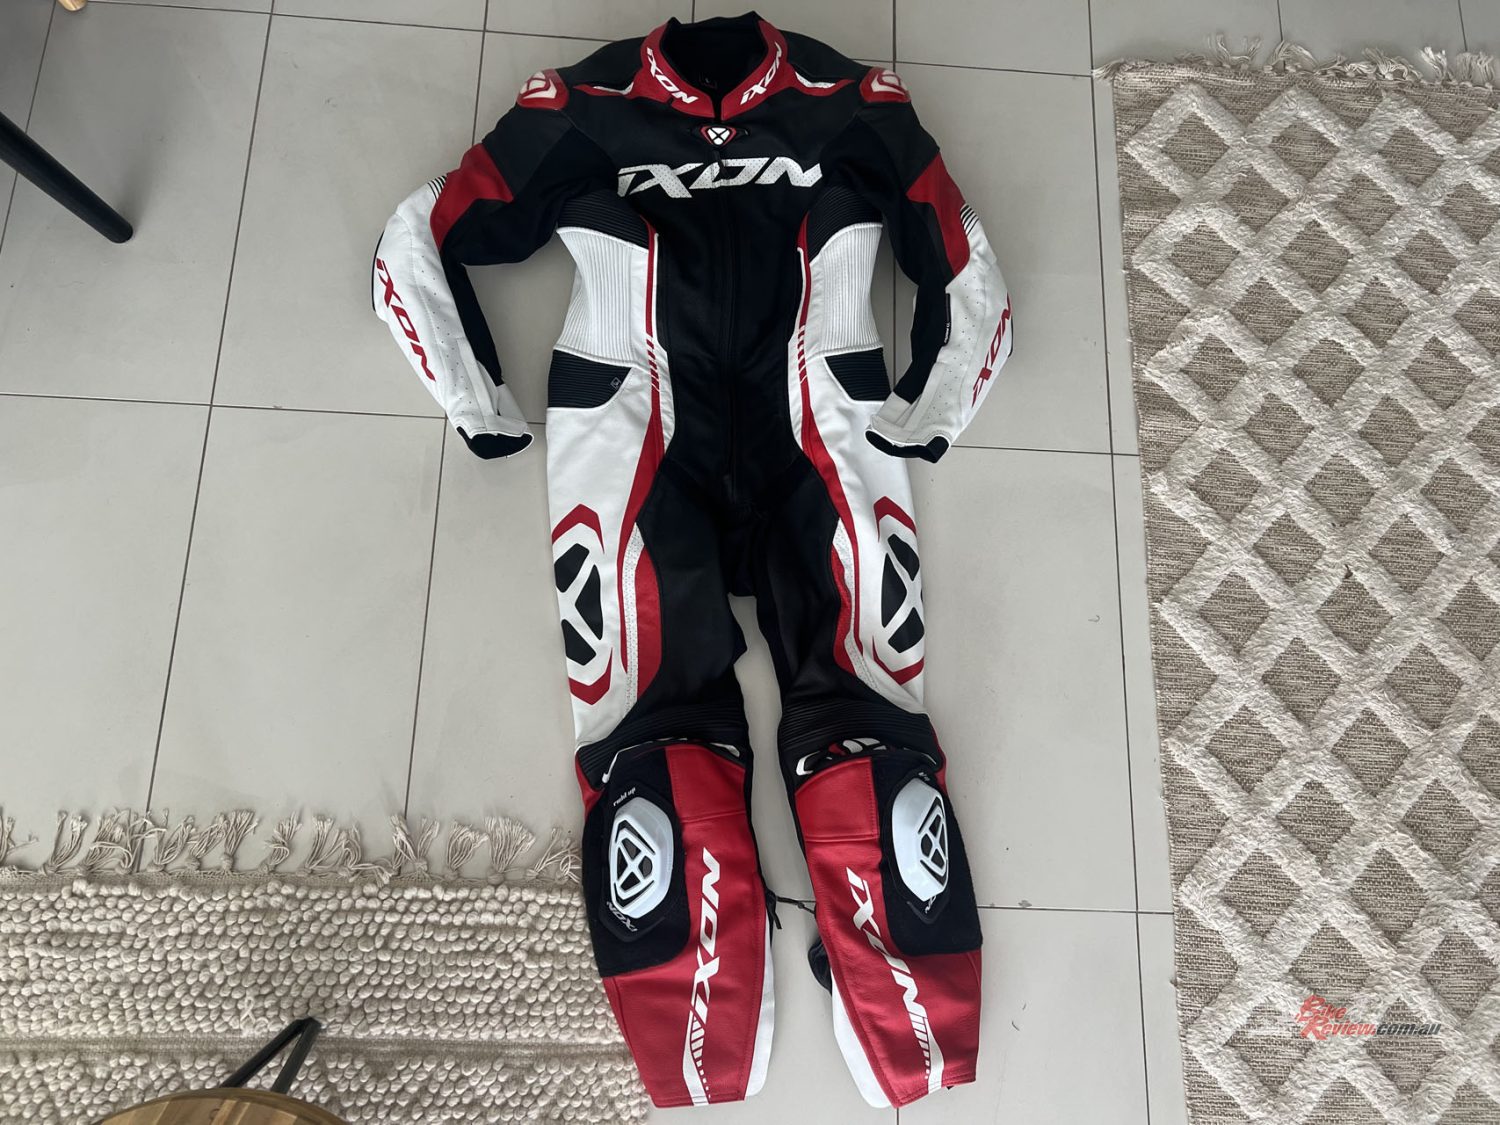 Not only do they look spectacular, they fit perfectly and have plenty of features to keep you safe and cool on the track. Check out what our first impressions are on the IXON Vortex 2 one-piece leathers...